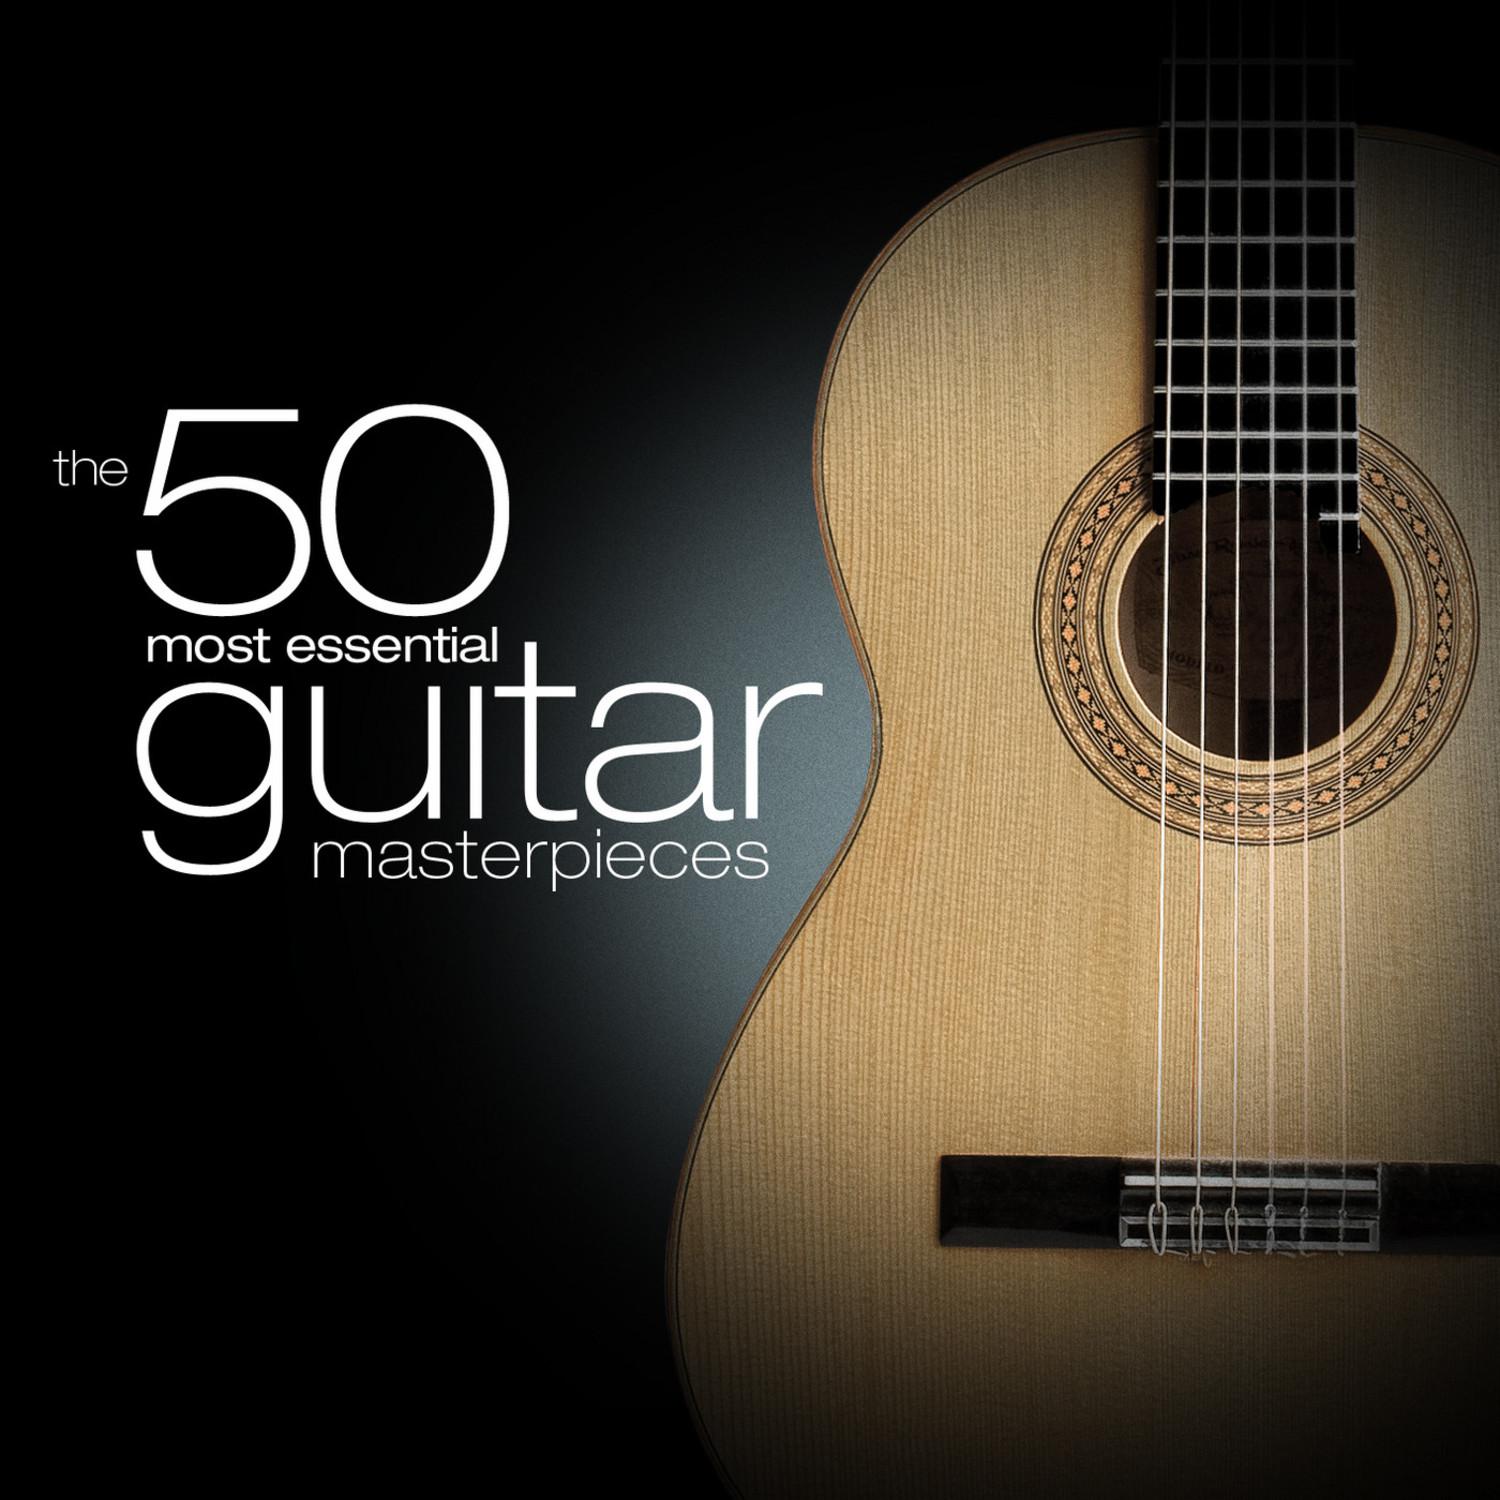 The 50 Most Essential Guitar Masterpieces